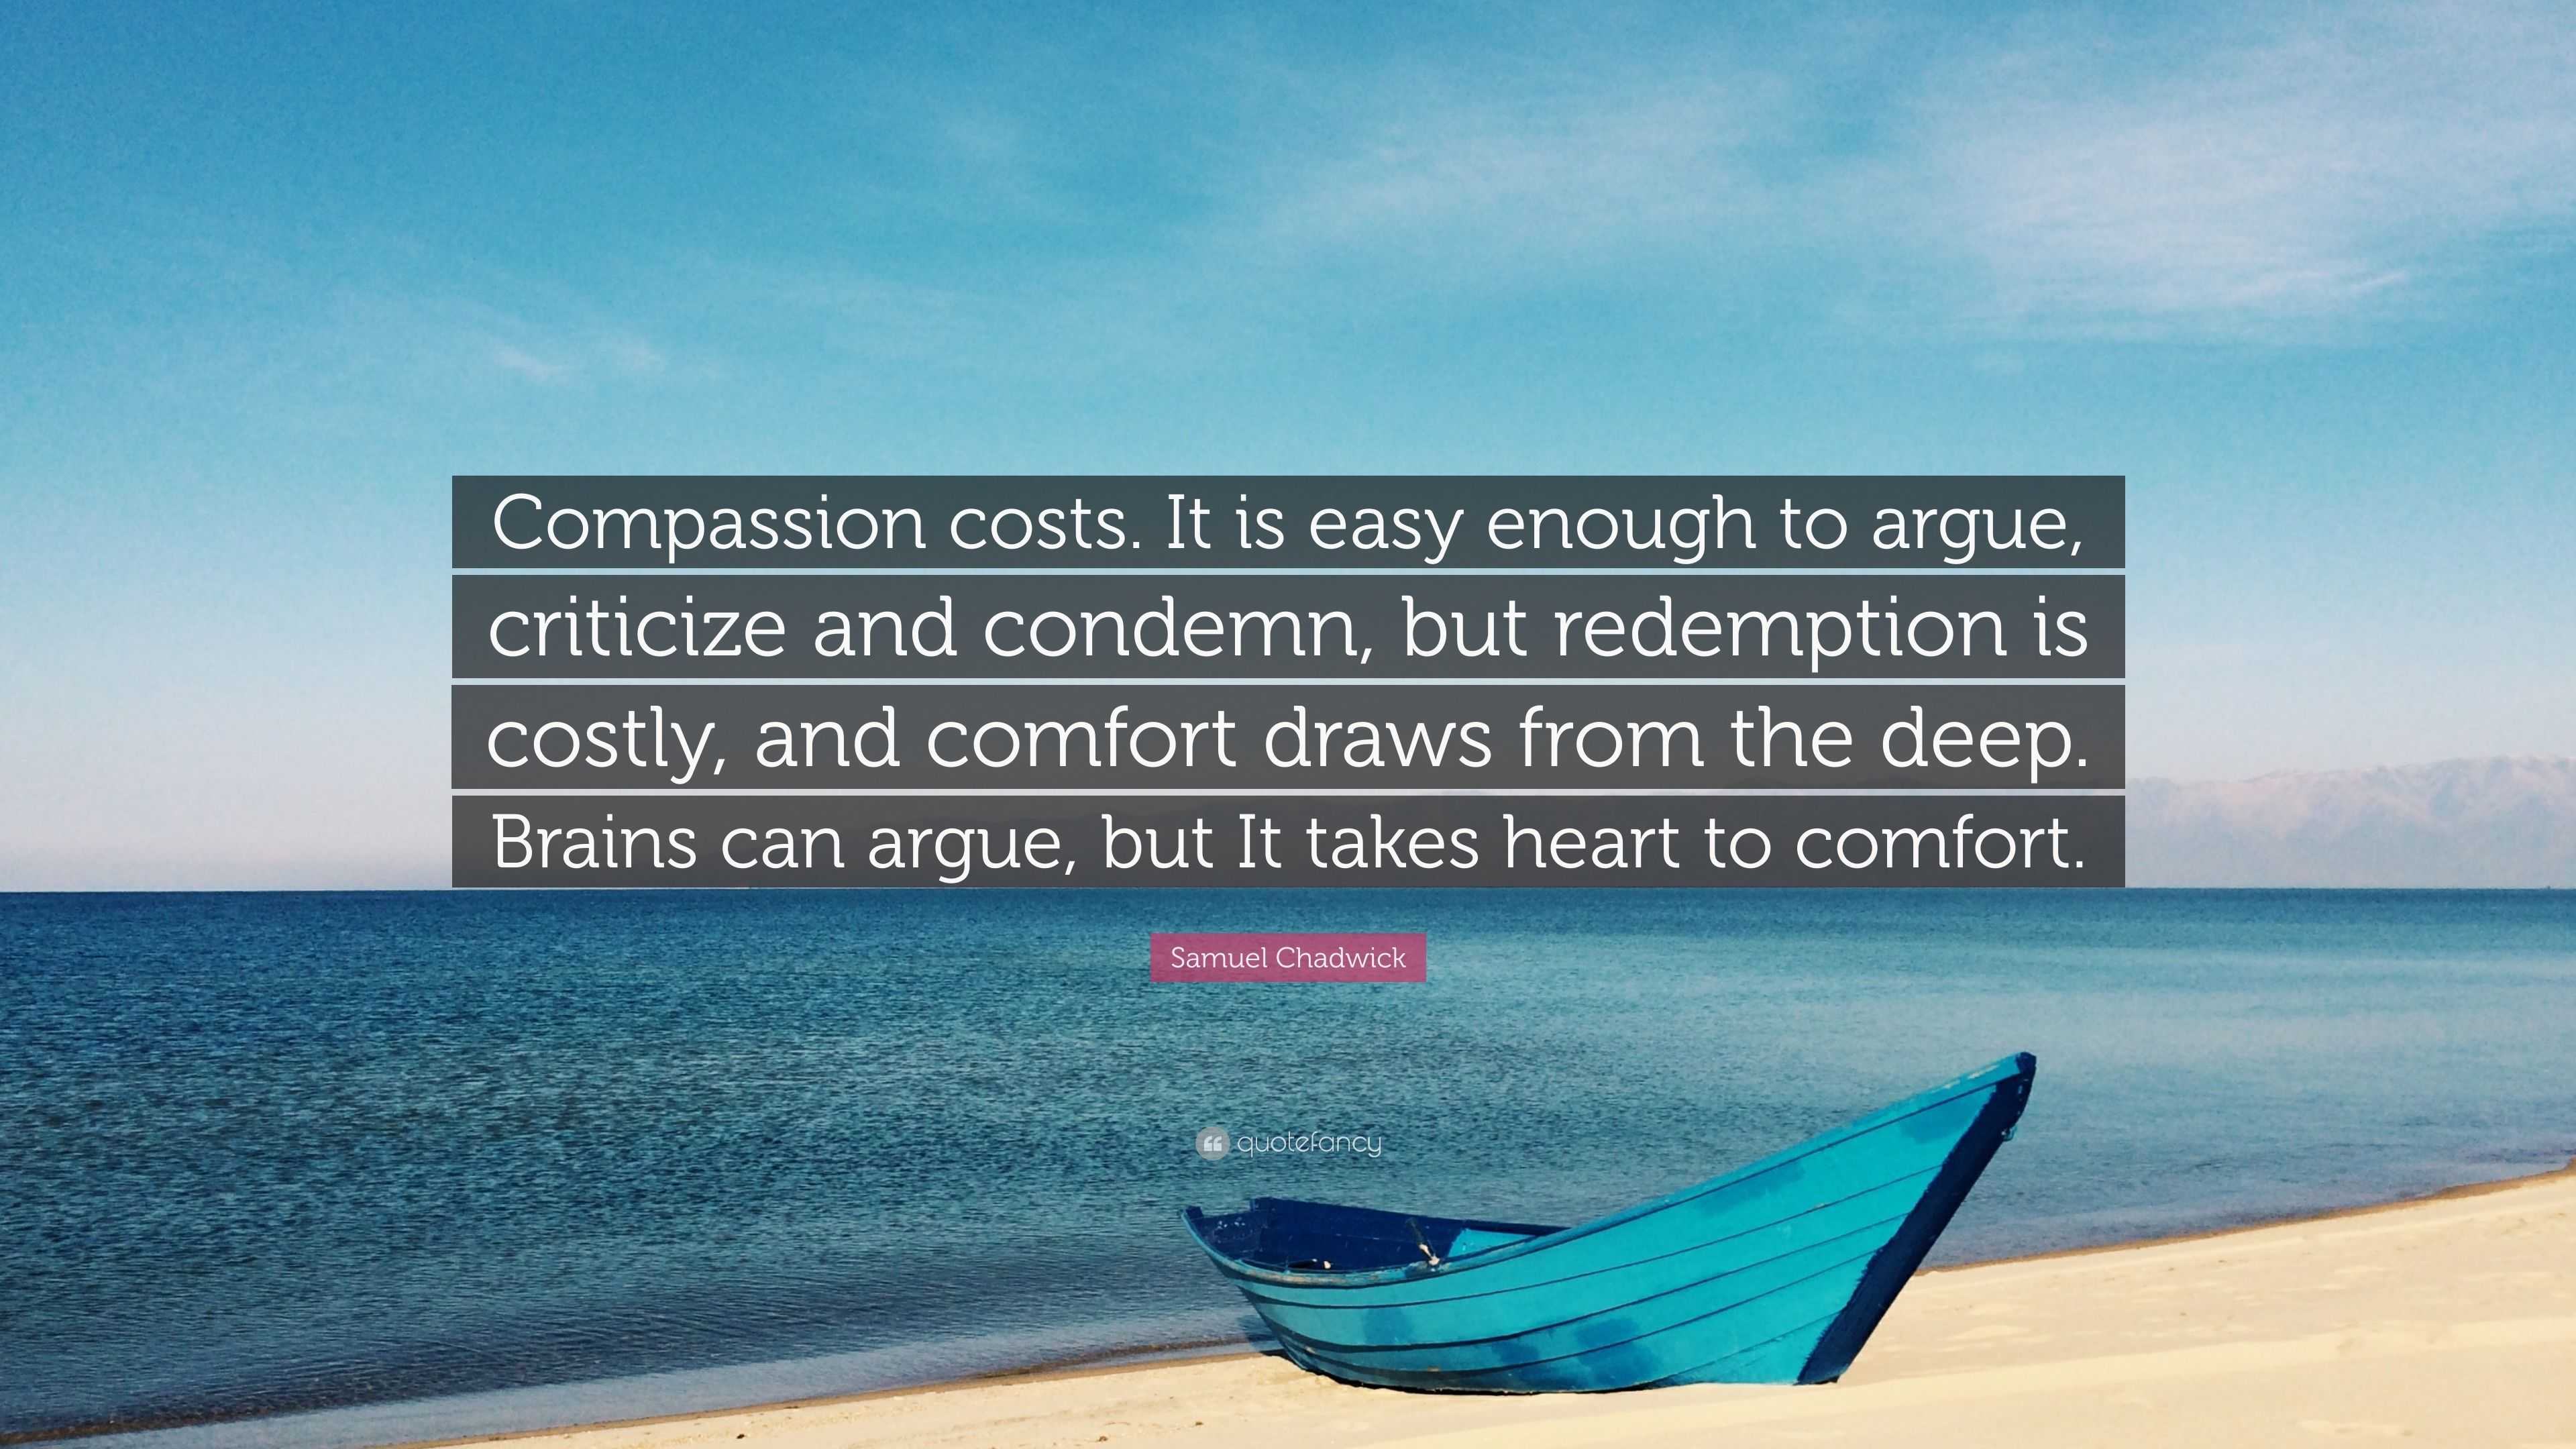 3016136-Samuel-Chadwick-Quote-Compassion-costs-It-is-easy-enough-to-argue.jpg